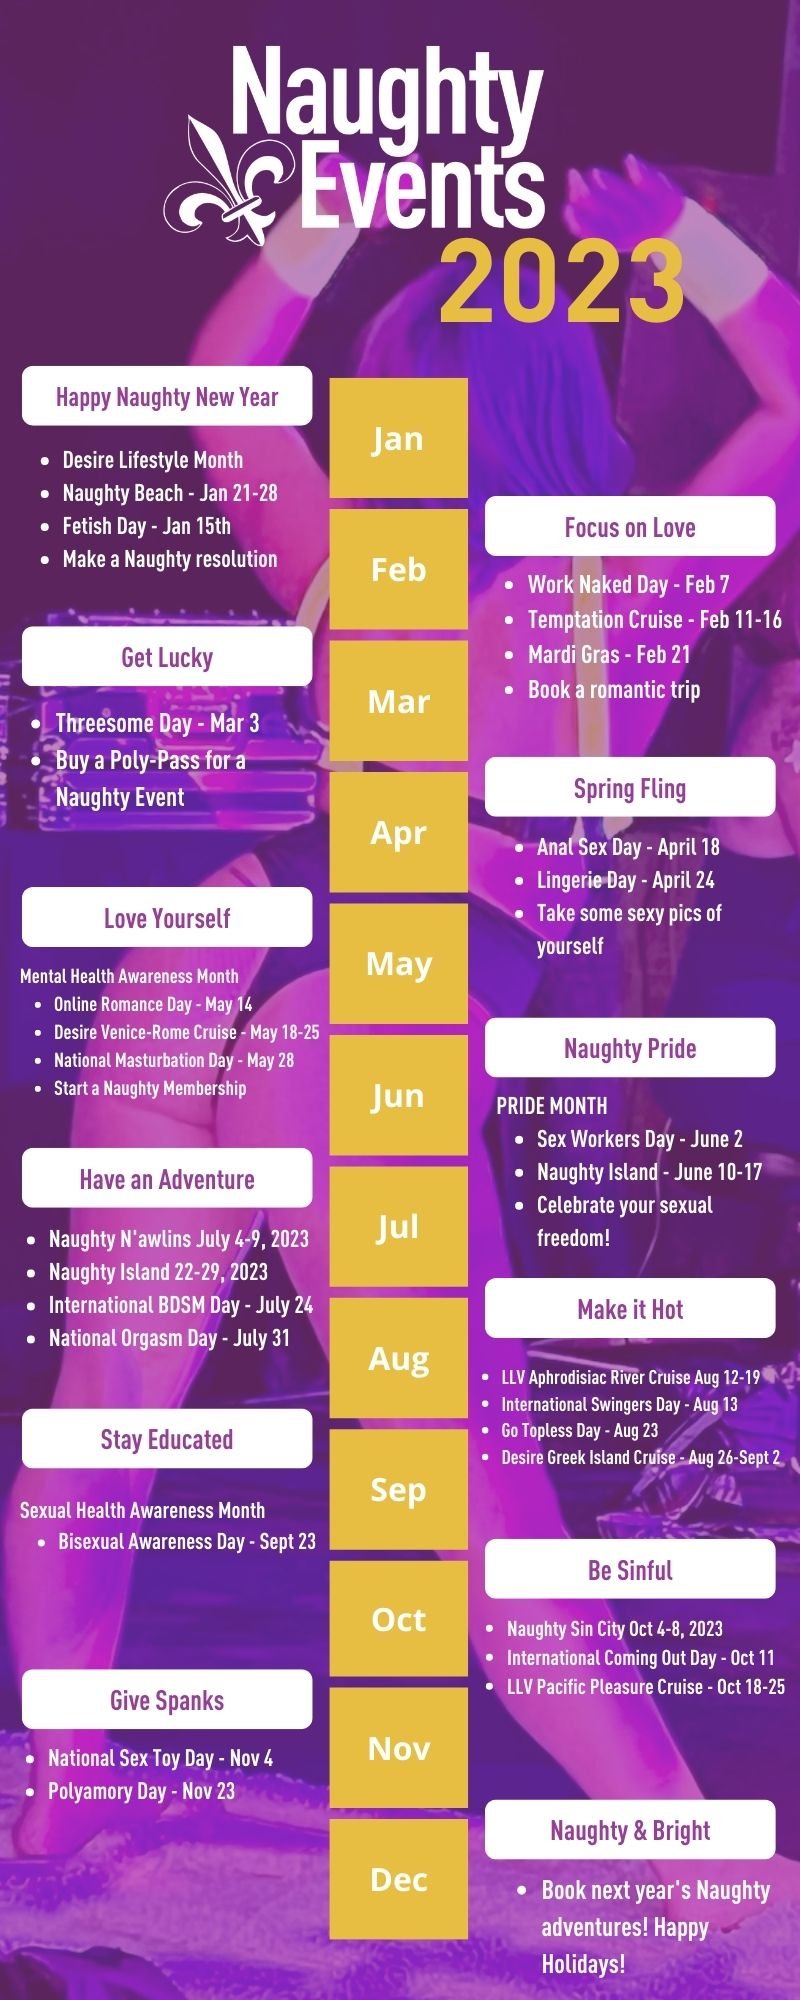 Naughty Events Calendar 2023 — NAUGHTY EVENTS